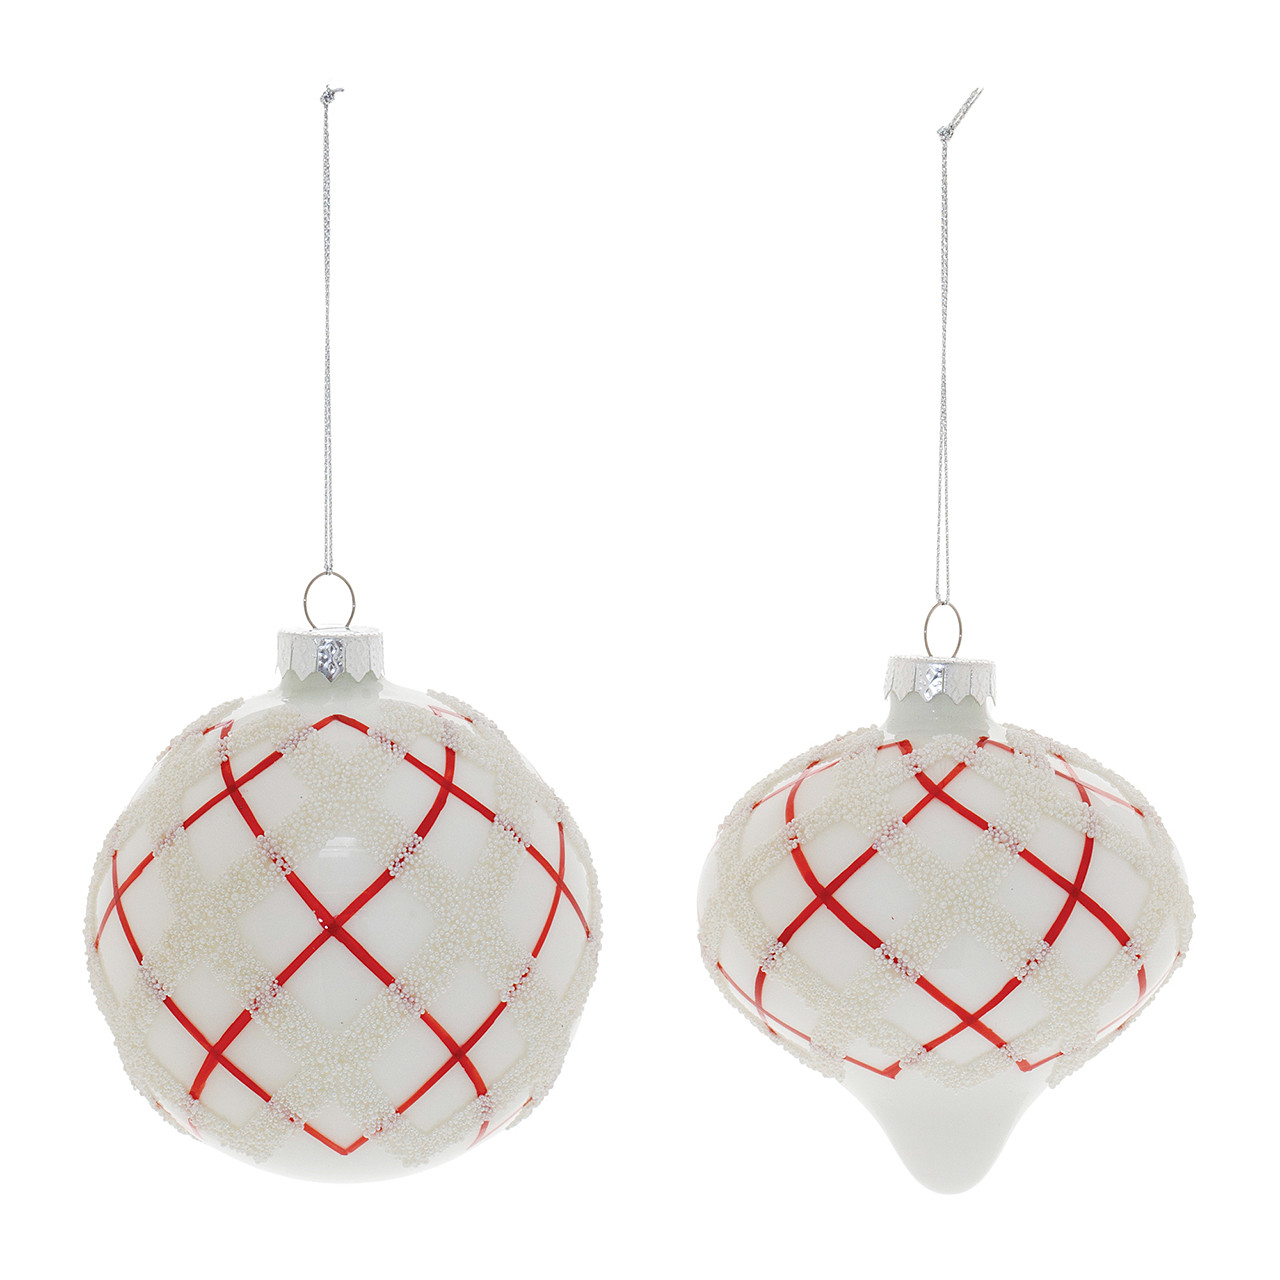 In-Store Only - Glass Red and White Criss Cross Ball Onion Ornament Individual Option